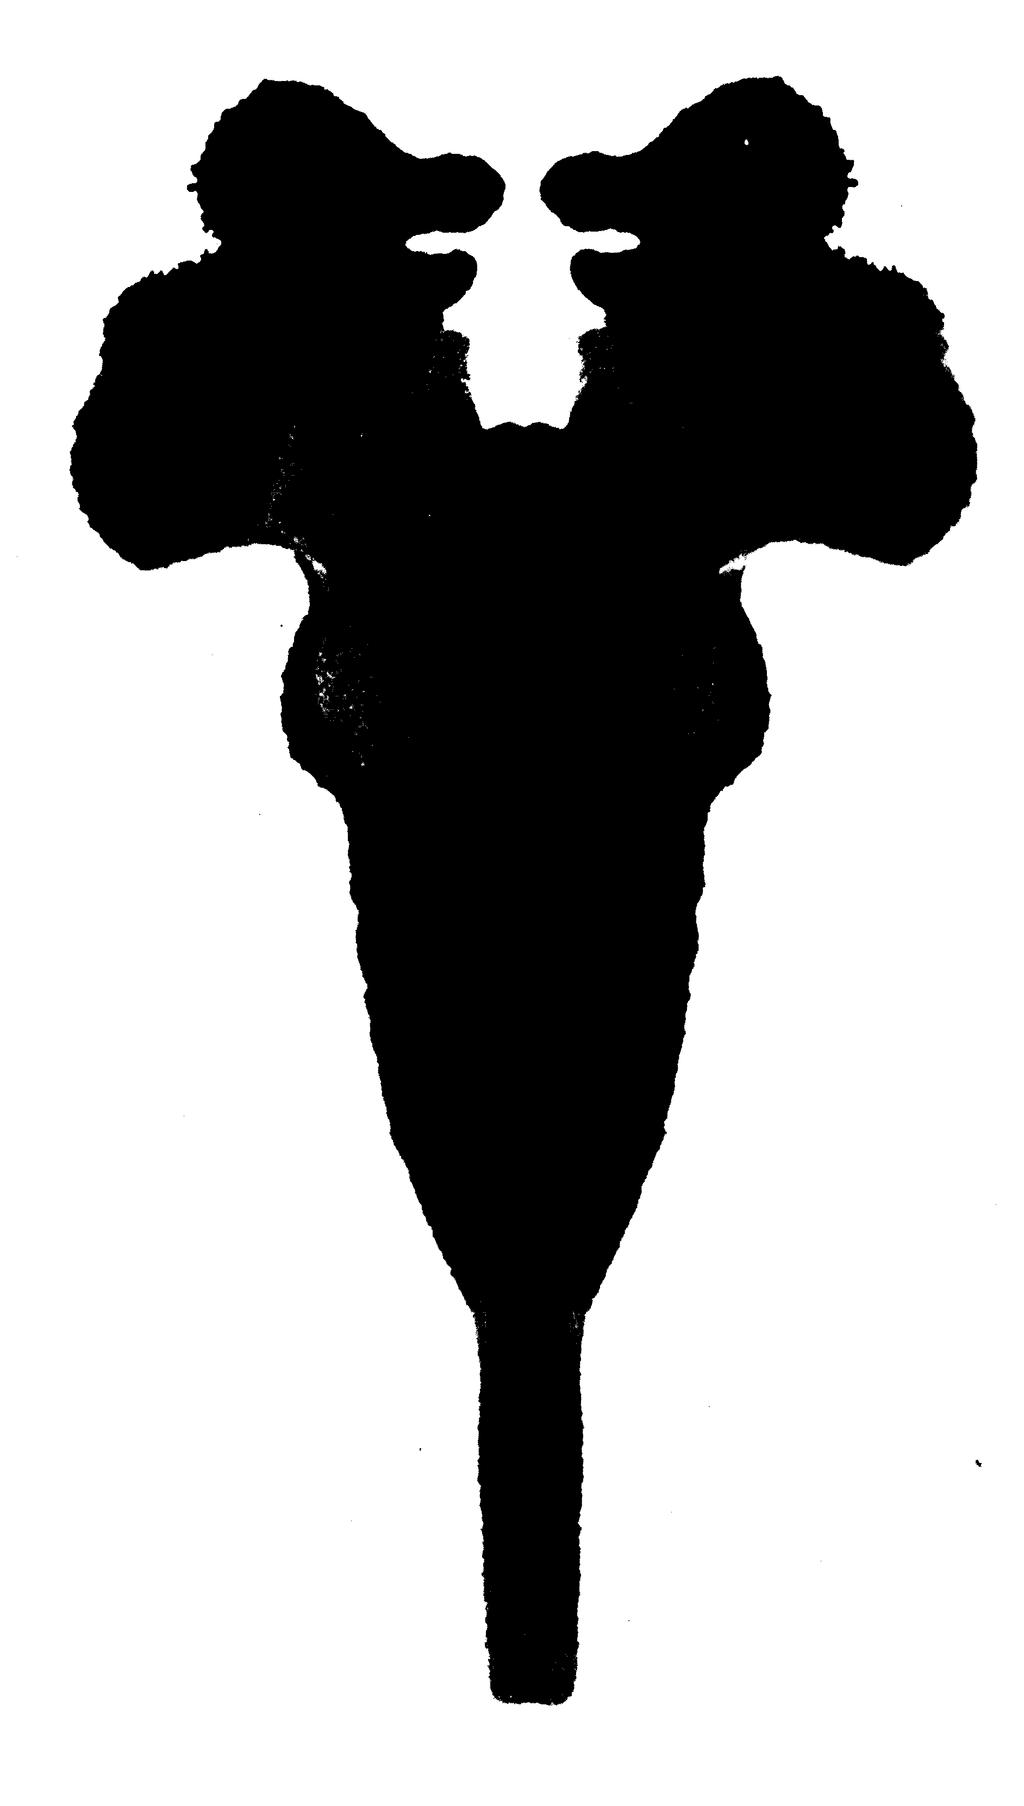 Types of Projective Tests Rorschach Inkblot Test: most widely used projective test,